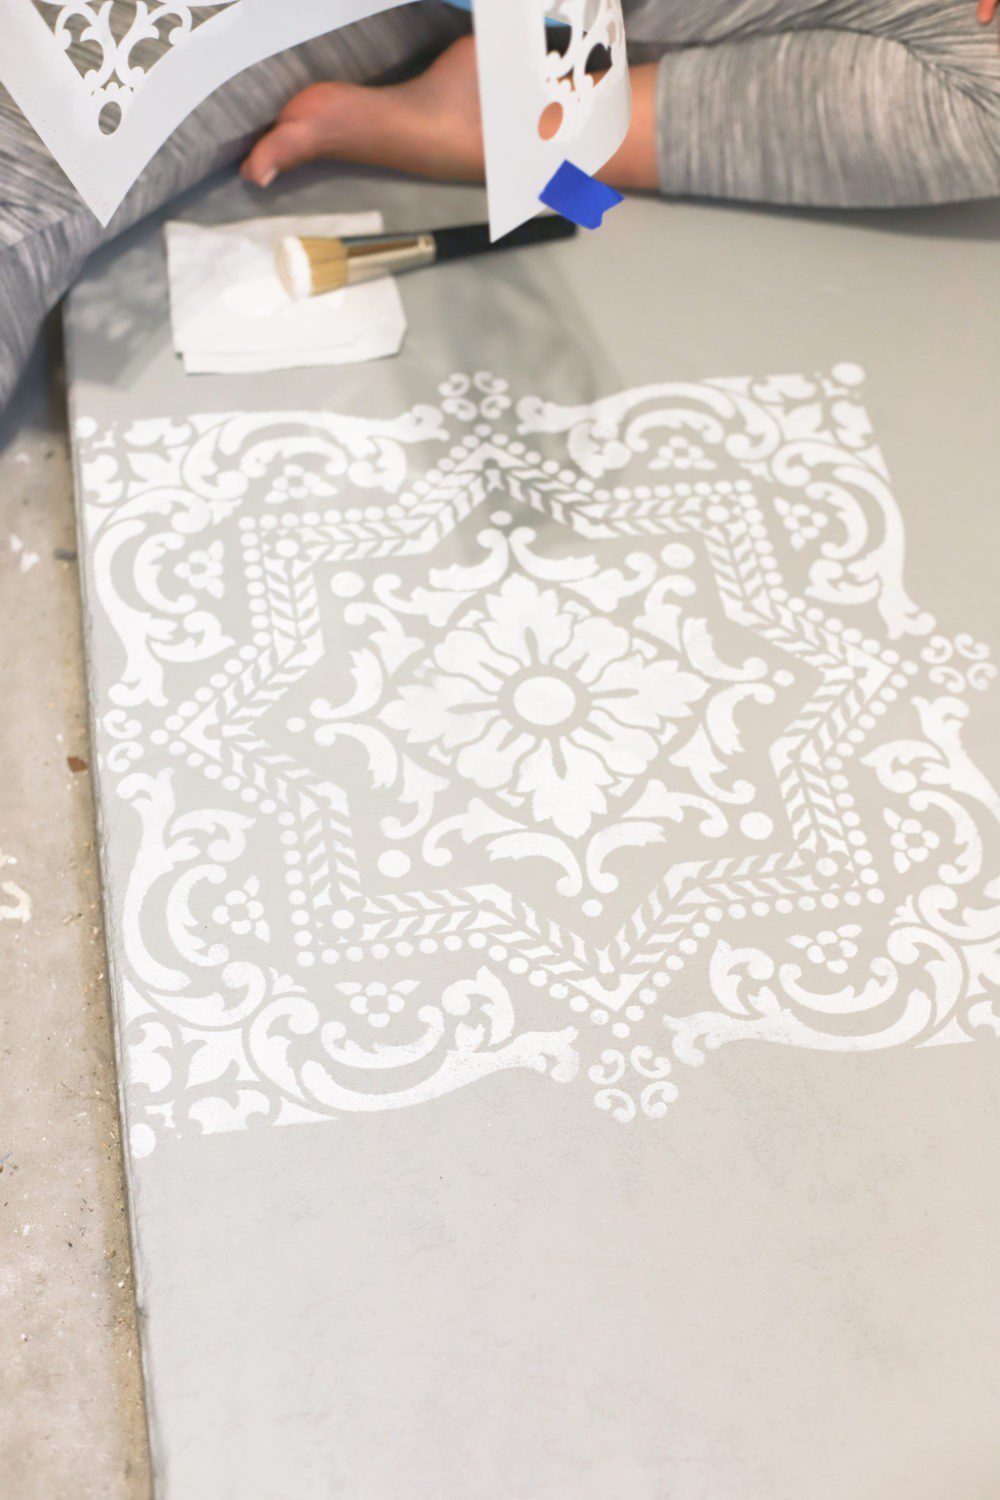 Laundry Room DIY: How to Paint a Cement Floor with Stencils | Laundry Room DIY: How to Paint a Cement Floor with Stencils by popular home decor blog, Fresh Mommy: image of a painted cement floor.